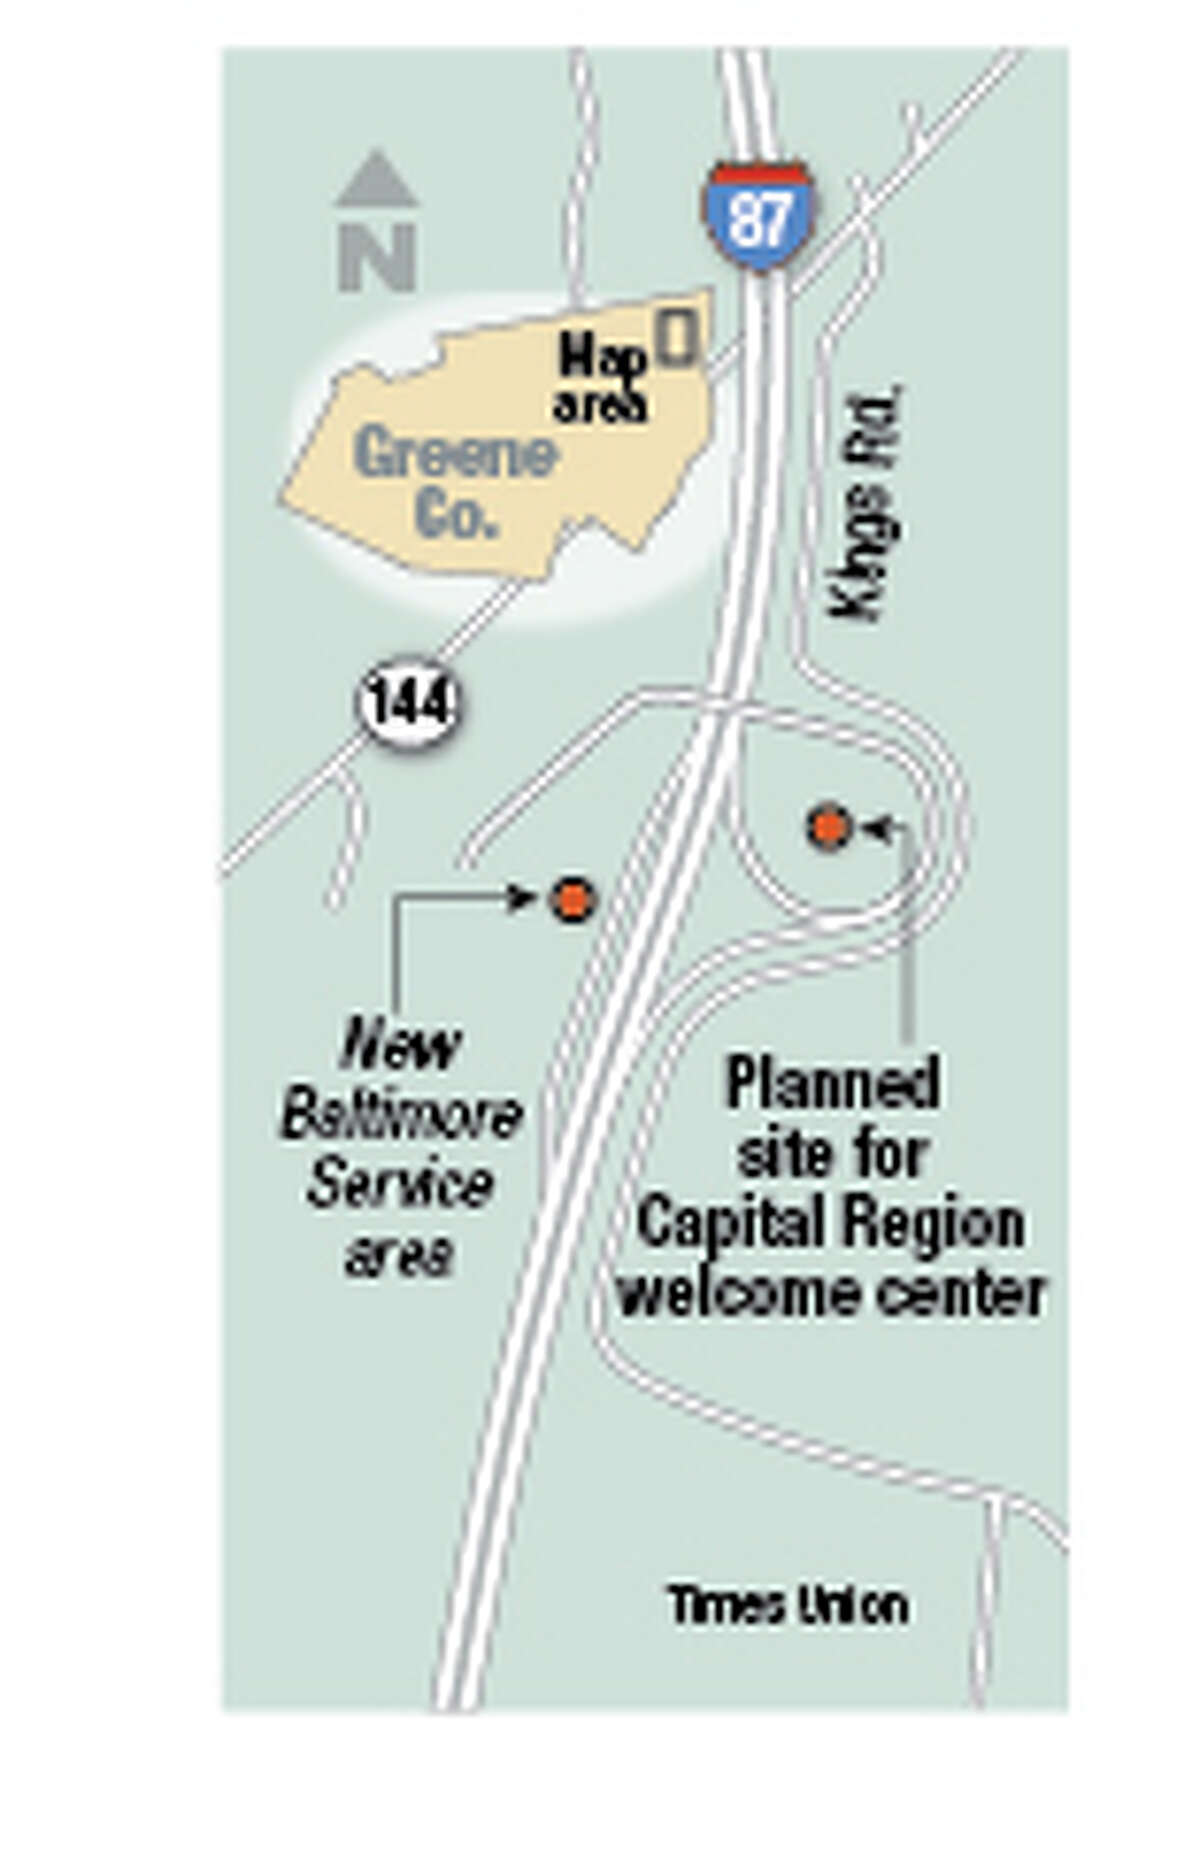 Gov. Andrew Cuomo?s plans for a network of centers along highways to promote New York products is now targeting the Capital Region, with plans for a facility along the state Thruway in Greene County. The Thruway Authority is seeking bids next month for construction of a 10,000-square-foot ?Capital Region welcome center? to be built inside the cloverleaf off the northbound exit leading to the existing New Baltimore travel plaza. (Jeff Boyer/Times Union)